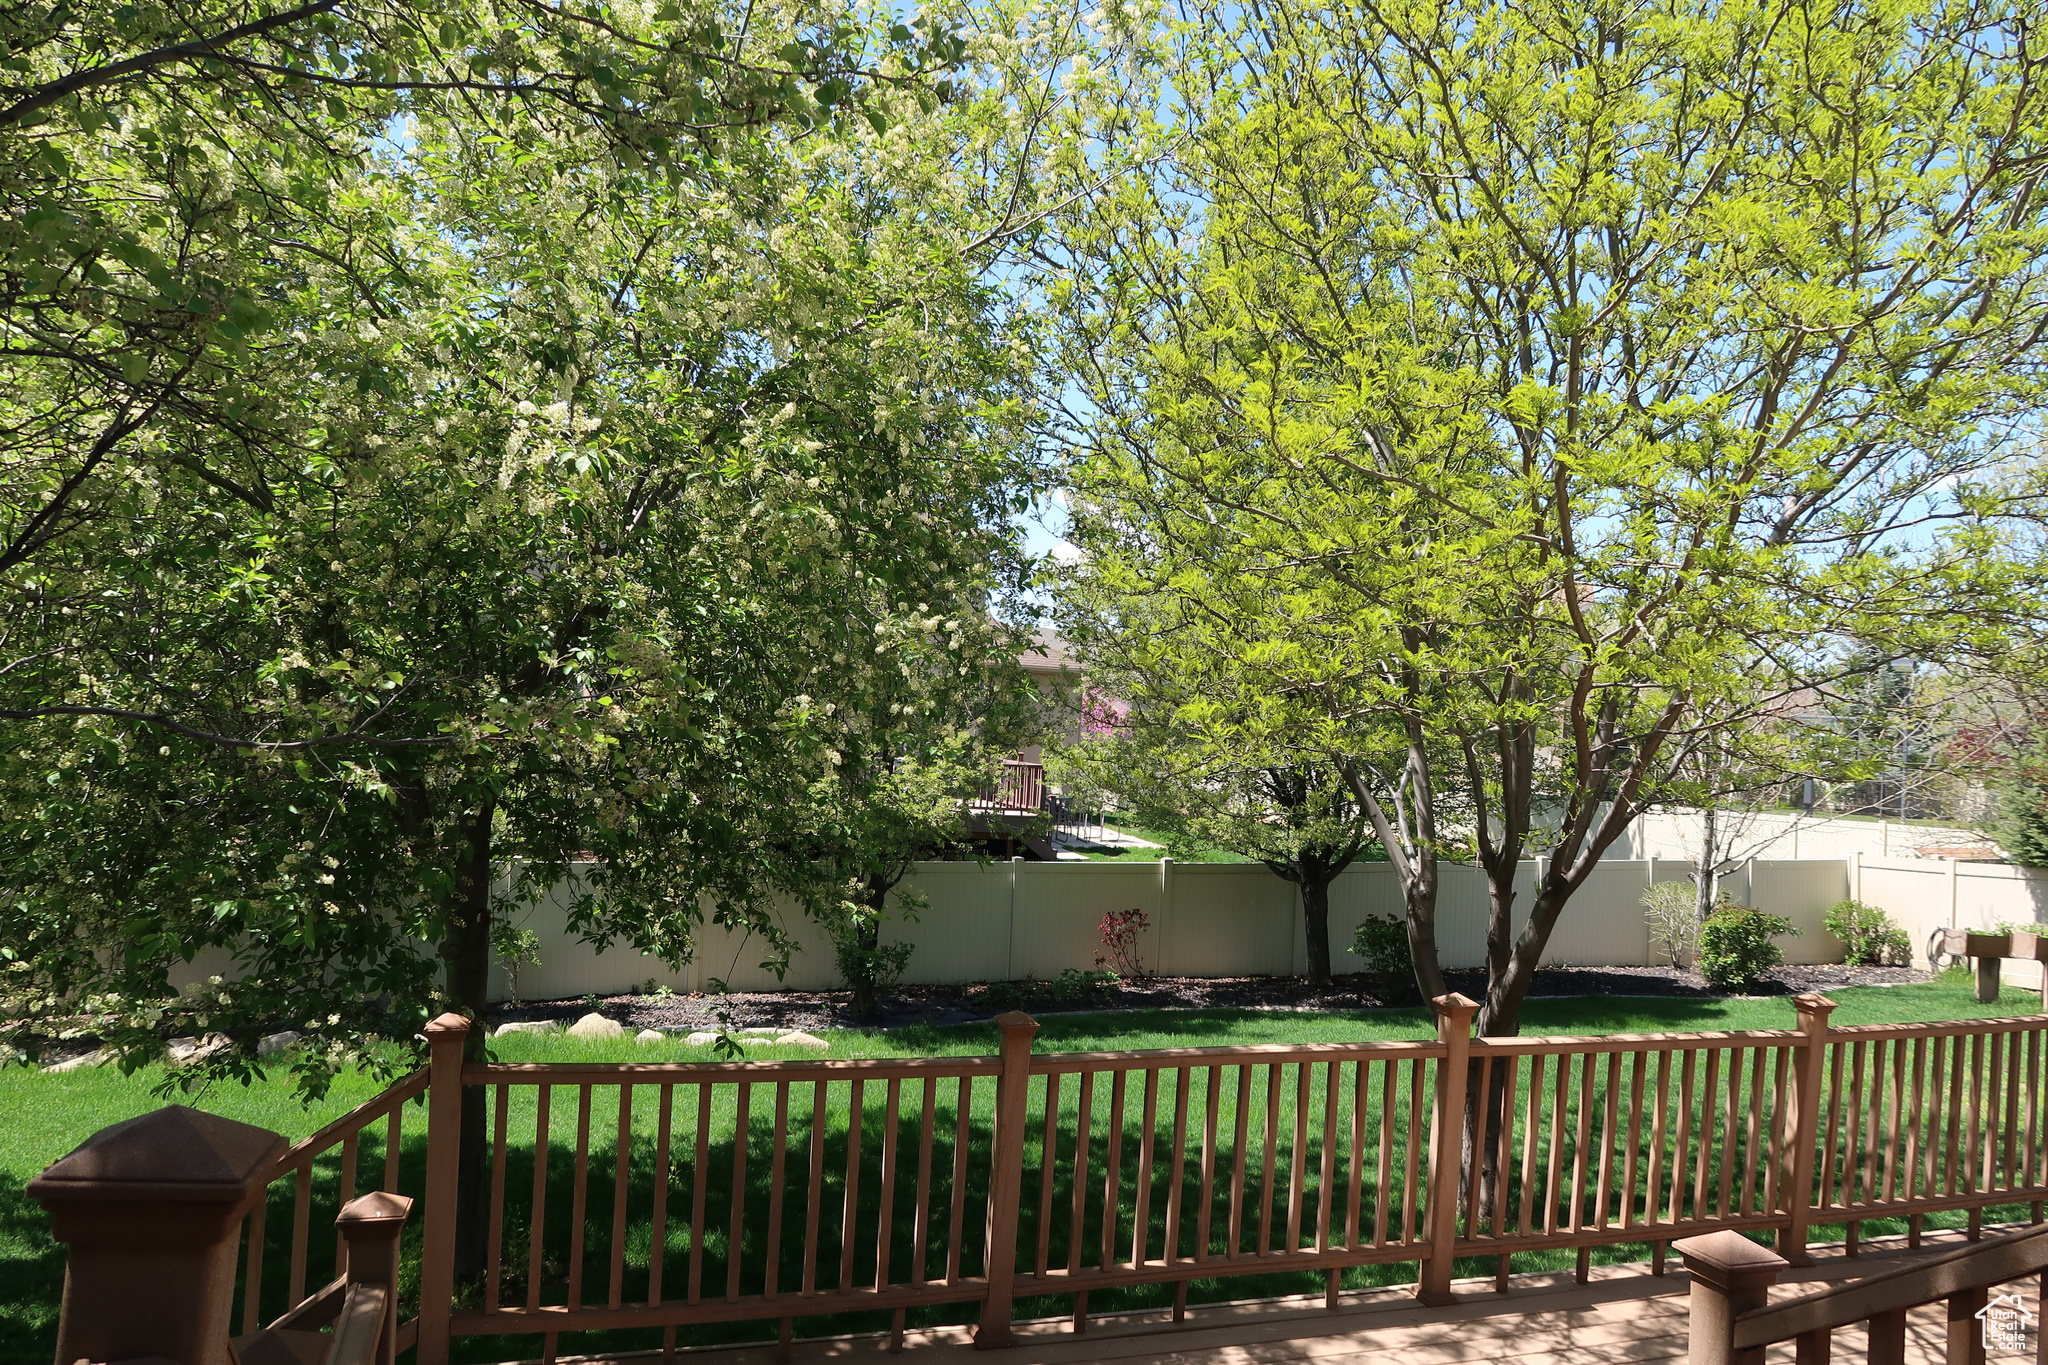 Trex deck with backyard of mature trees and fruit trees